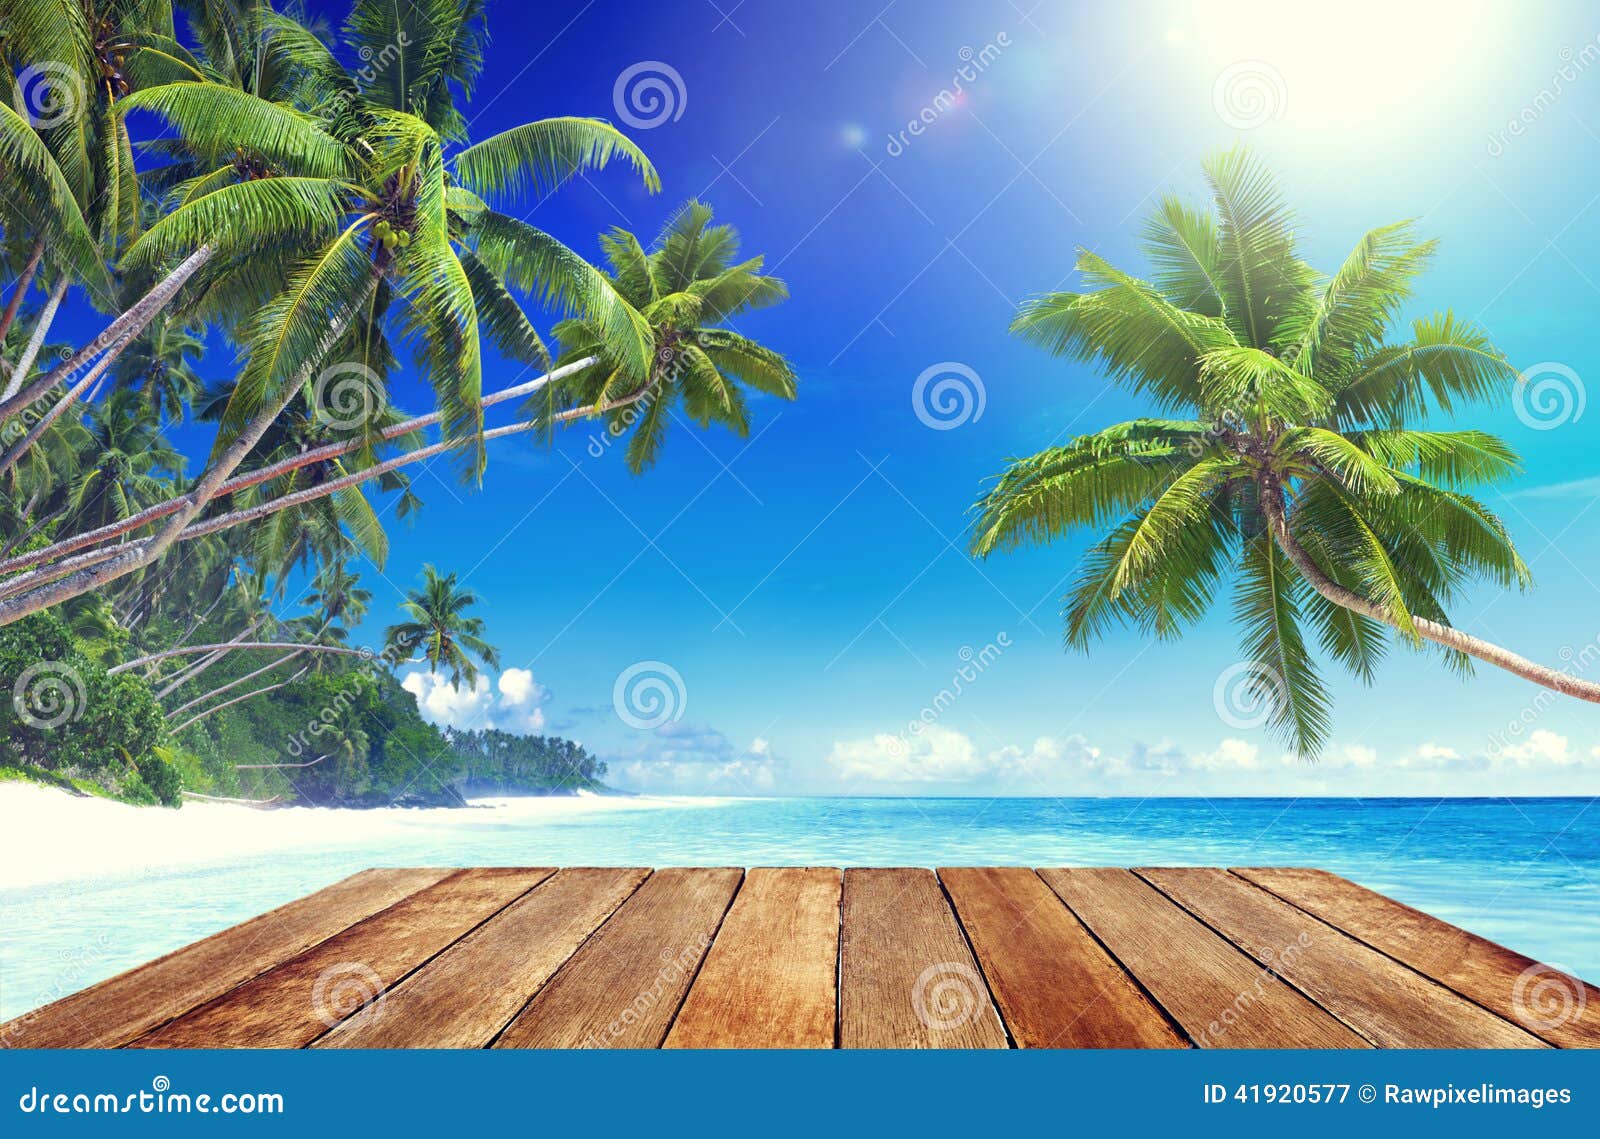 tropical paradise beach and wooden planks